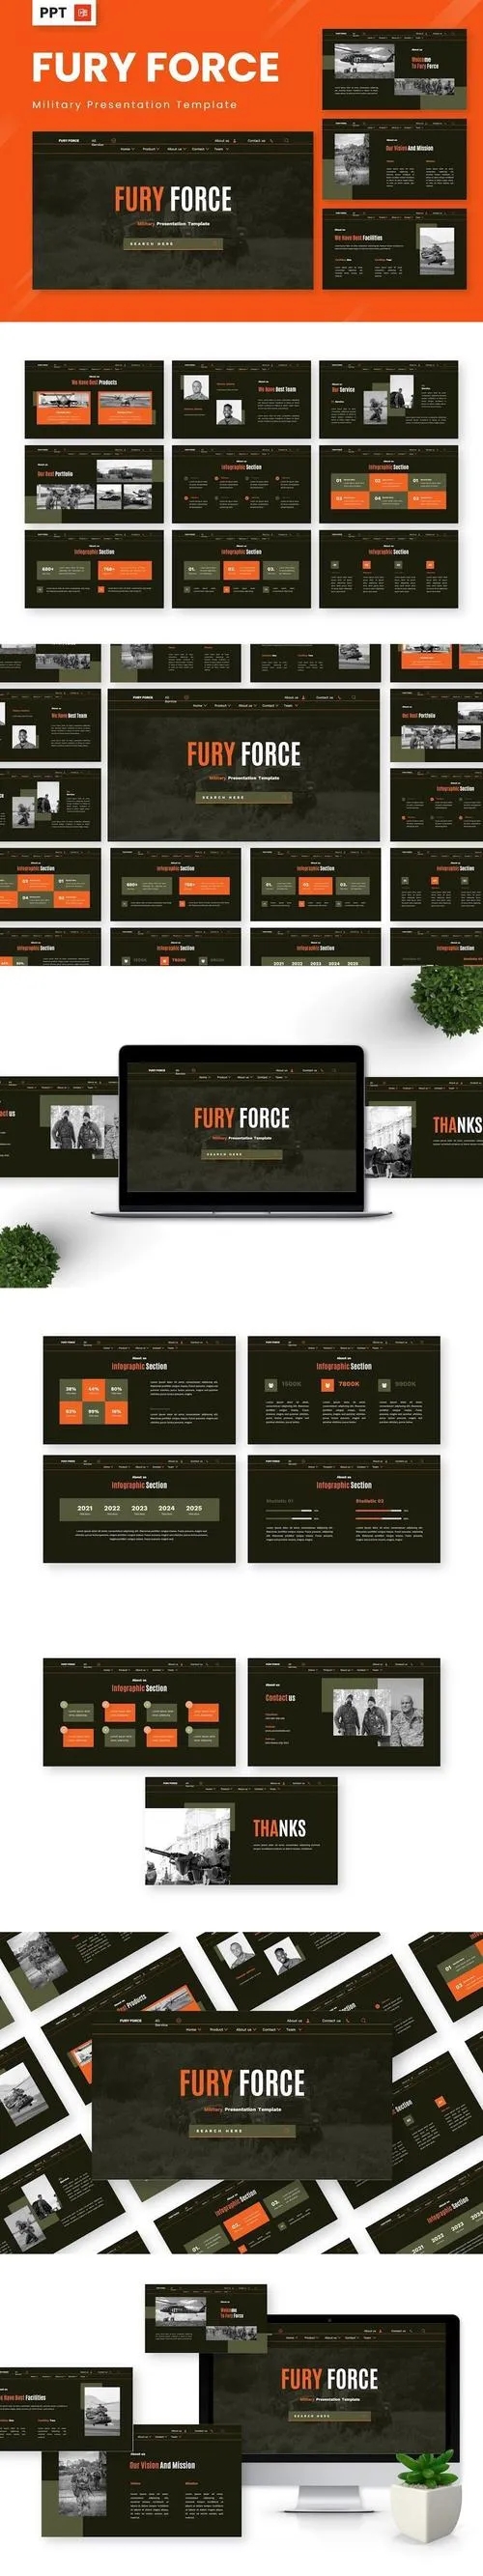 Fury Force - Military Powerpoint Templates